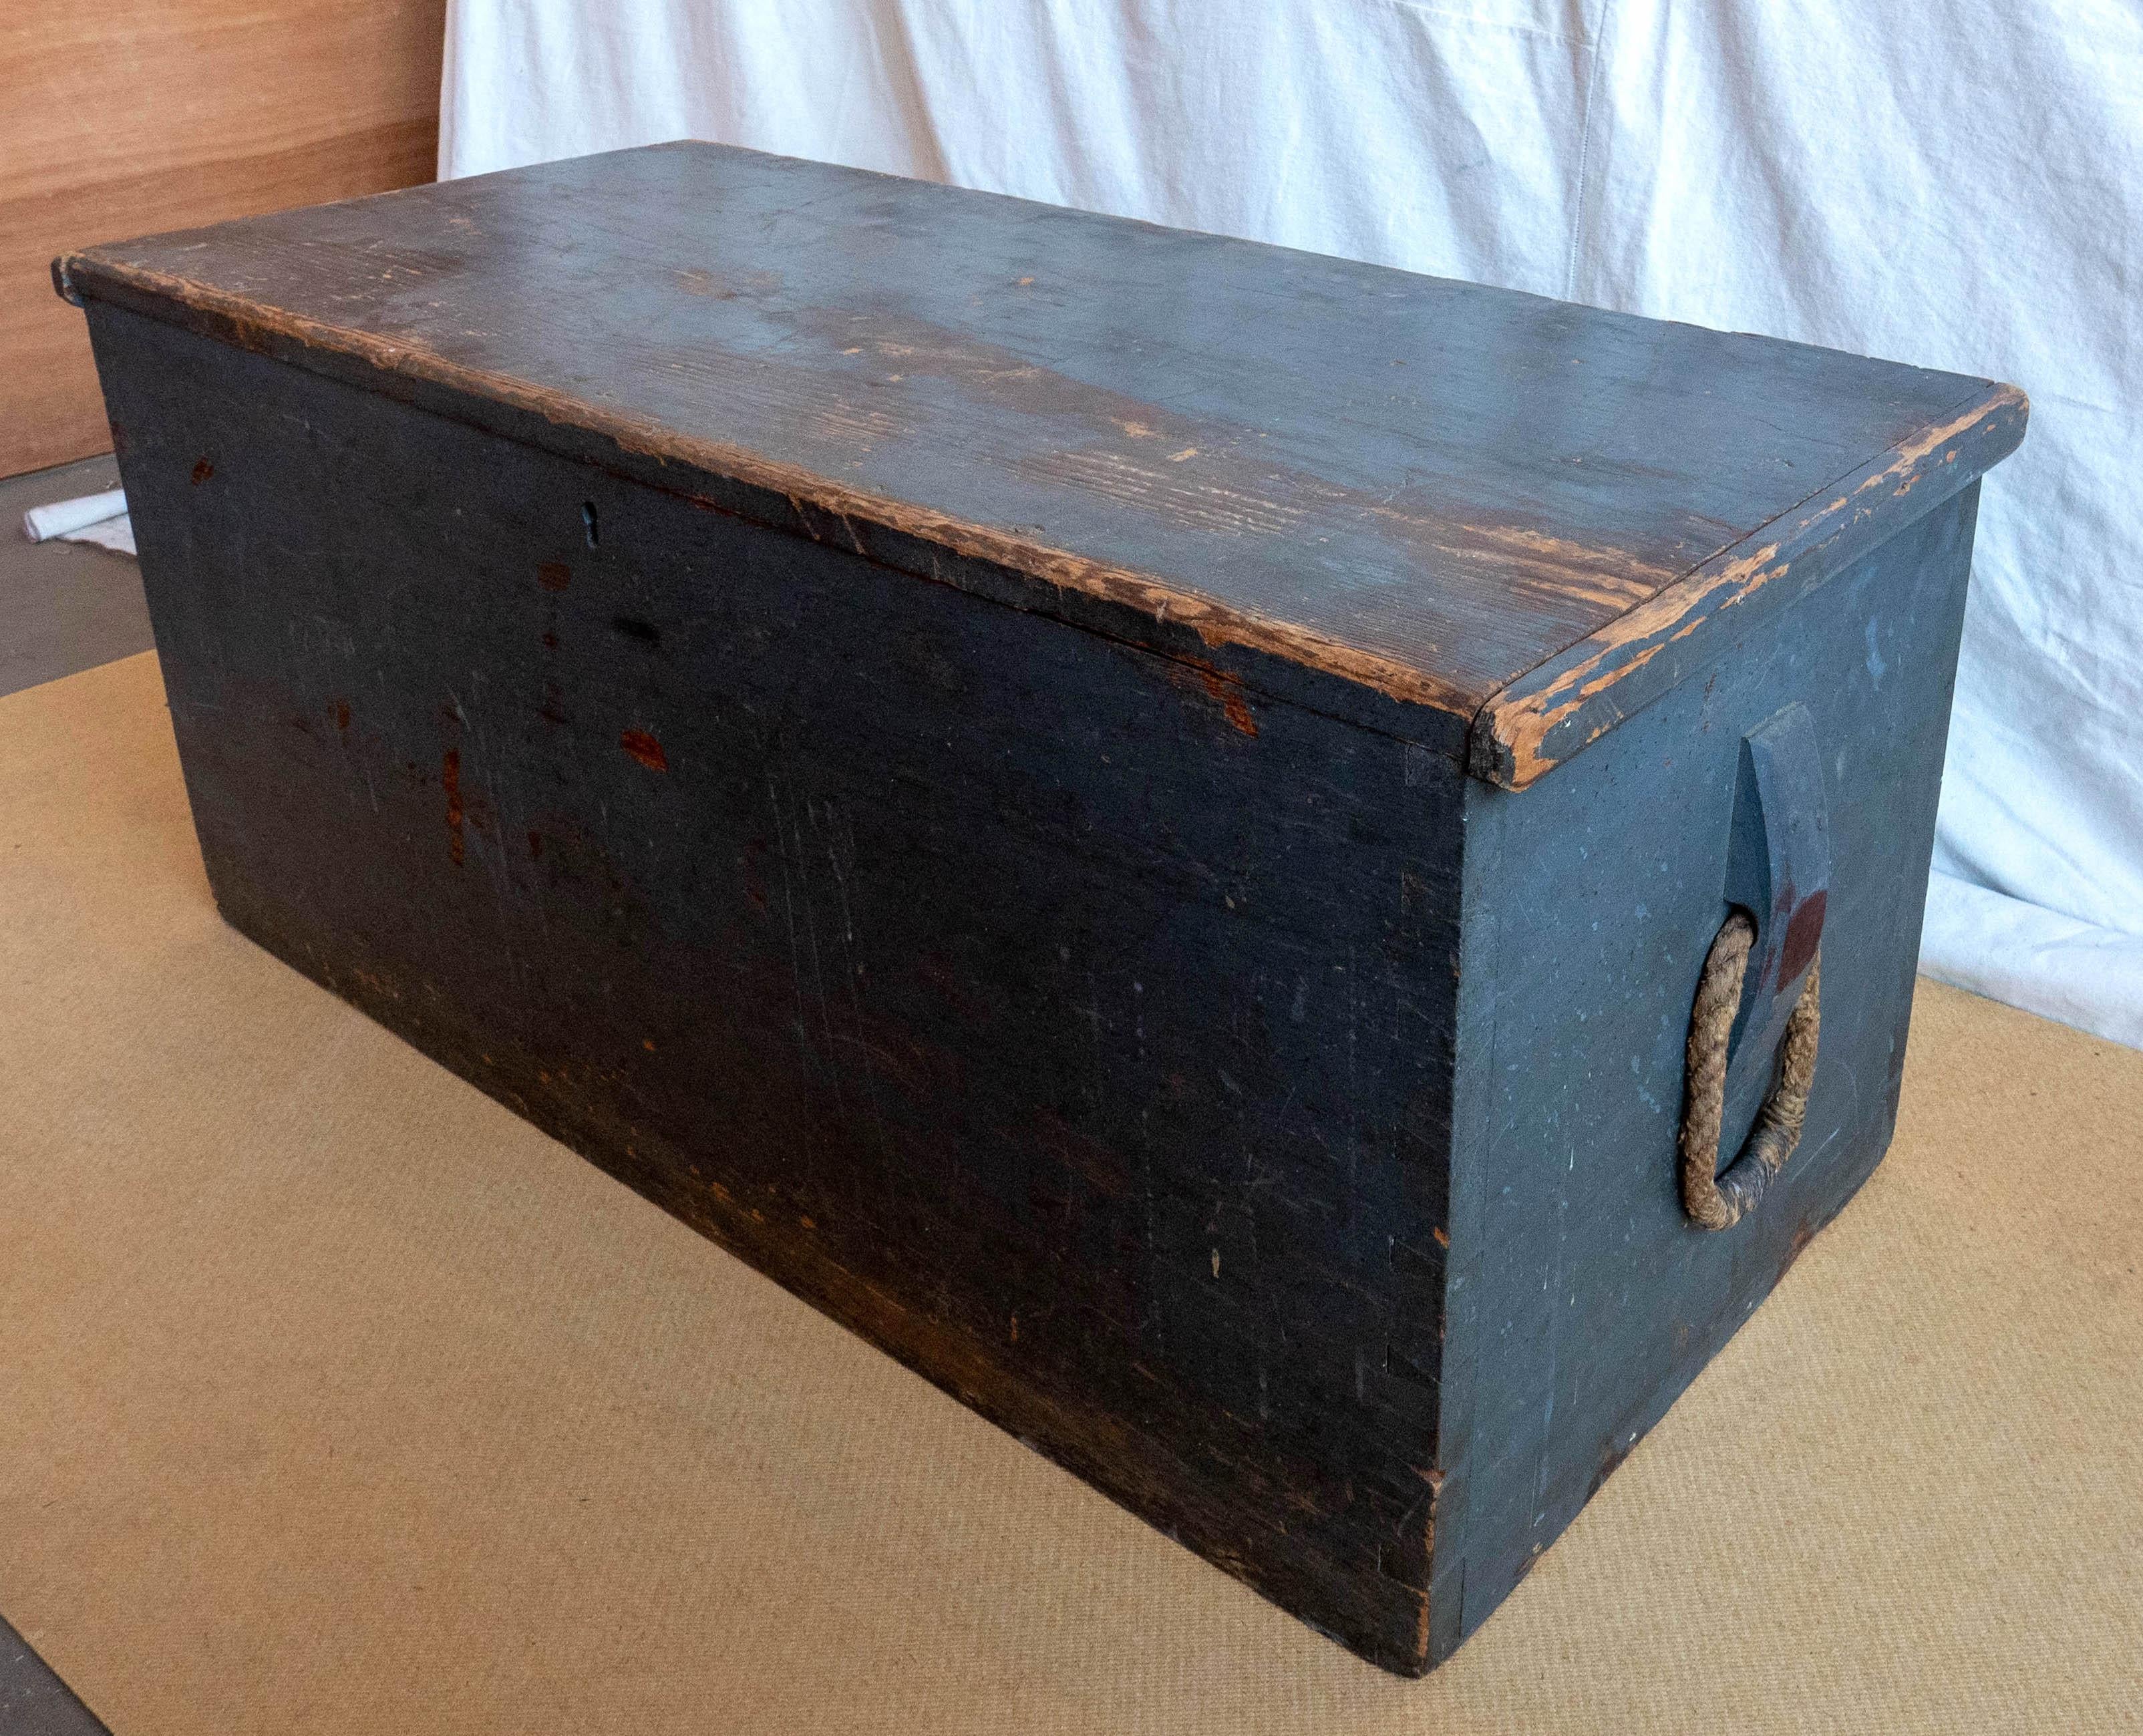 19th Century Blanket Chest in old blue paint with rope becket handle on right side, missing on left.